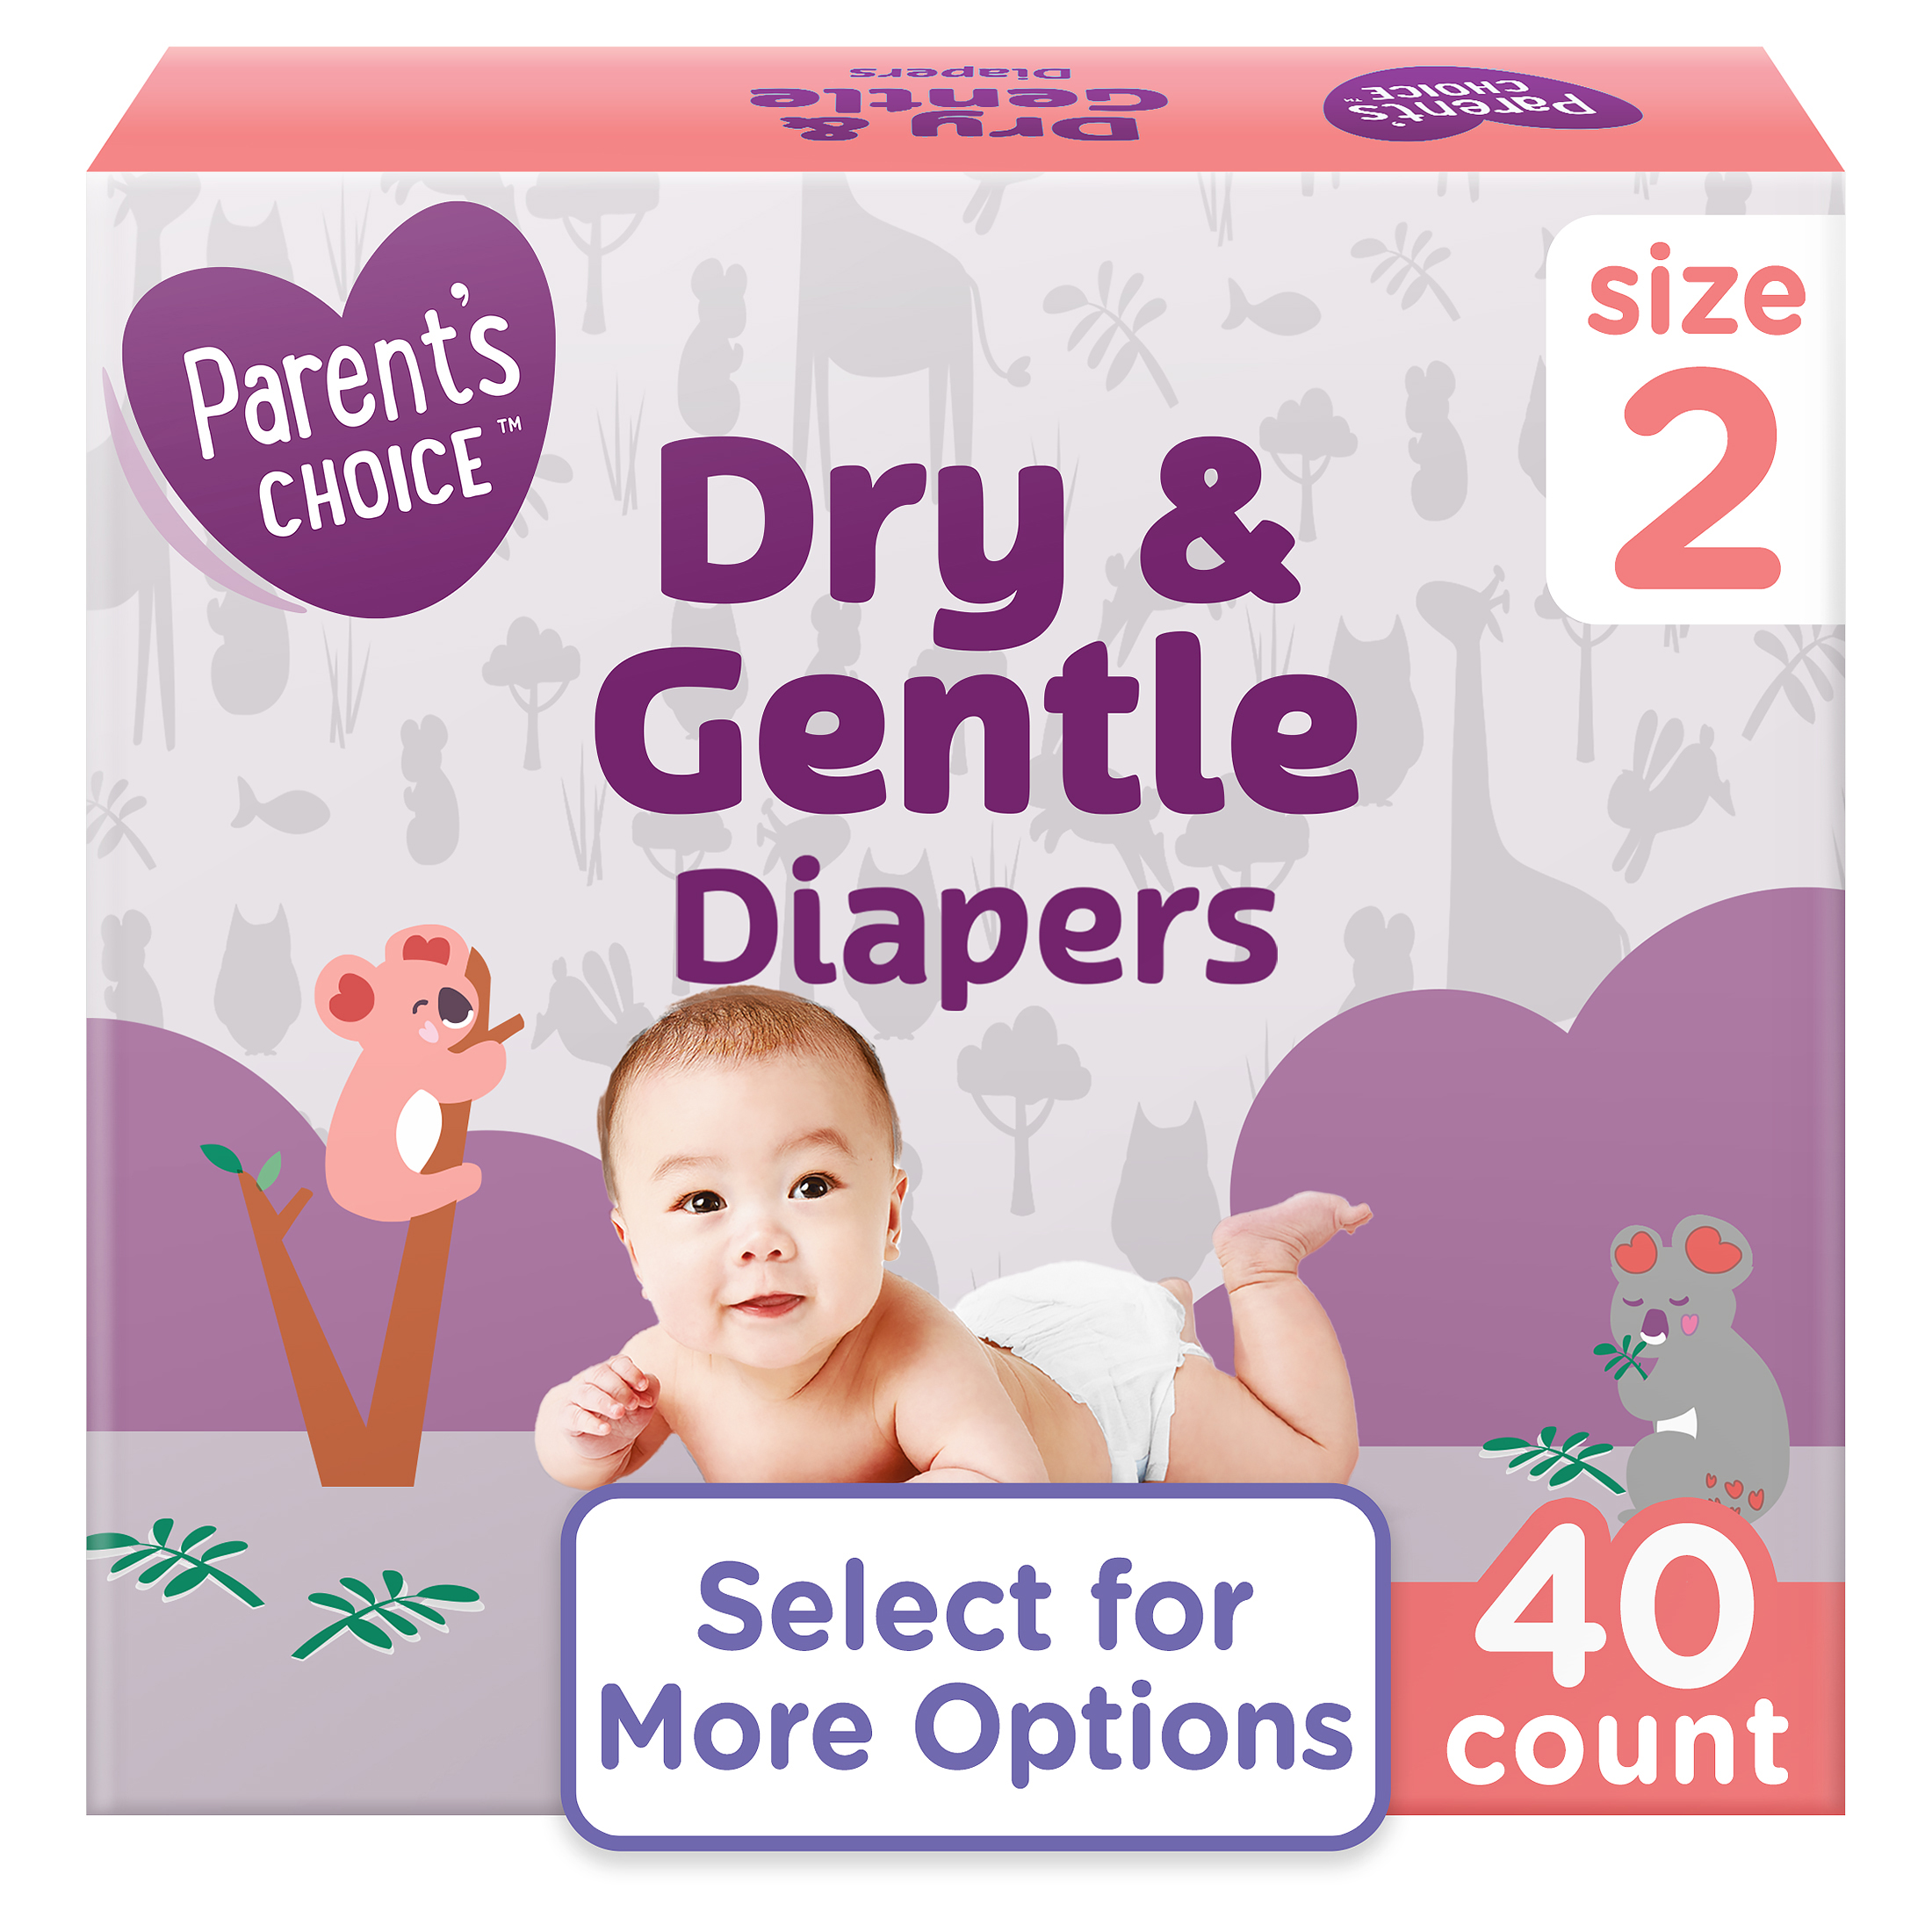 Parent's Choice Dry & Gentle Diapers Size 2, 40 Count (Select for More Options) - image 1 of 10